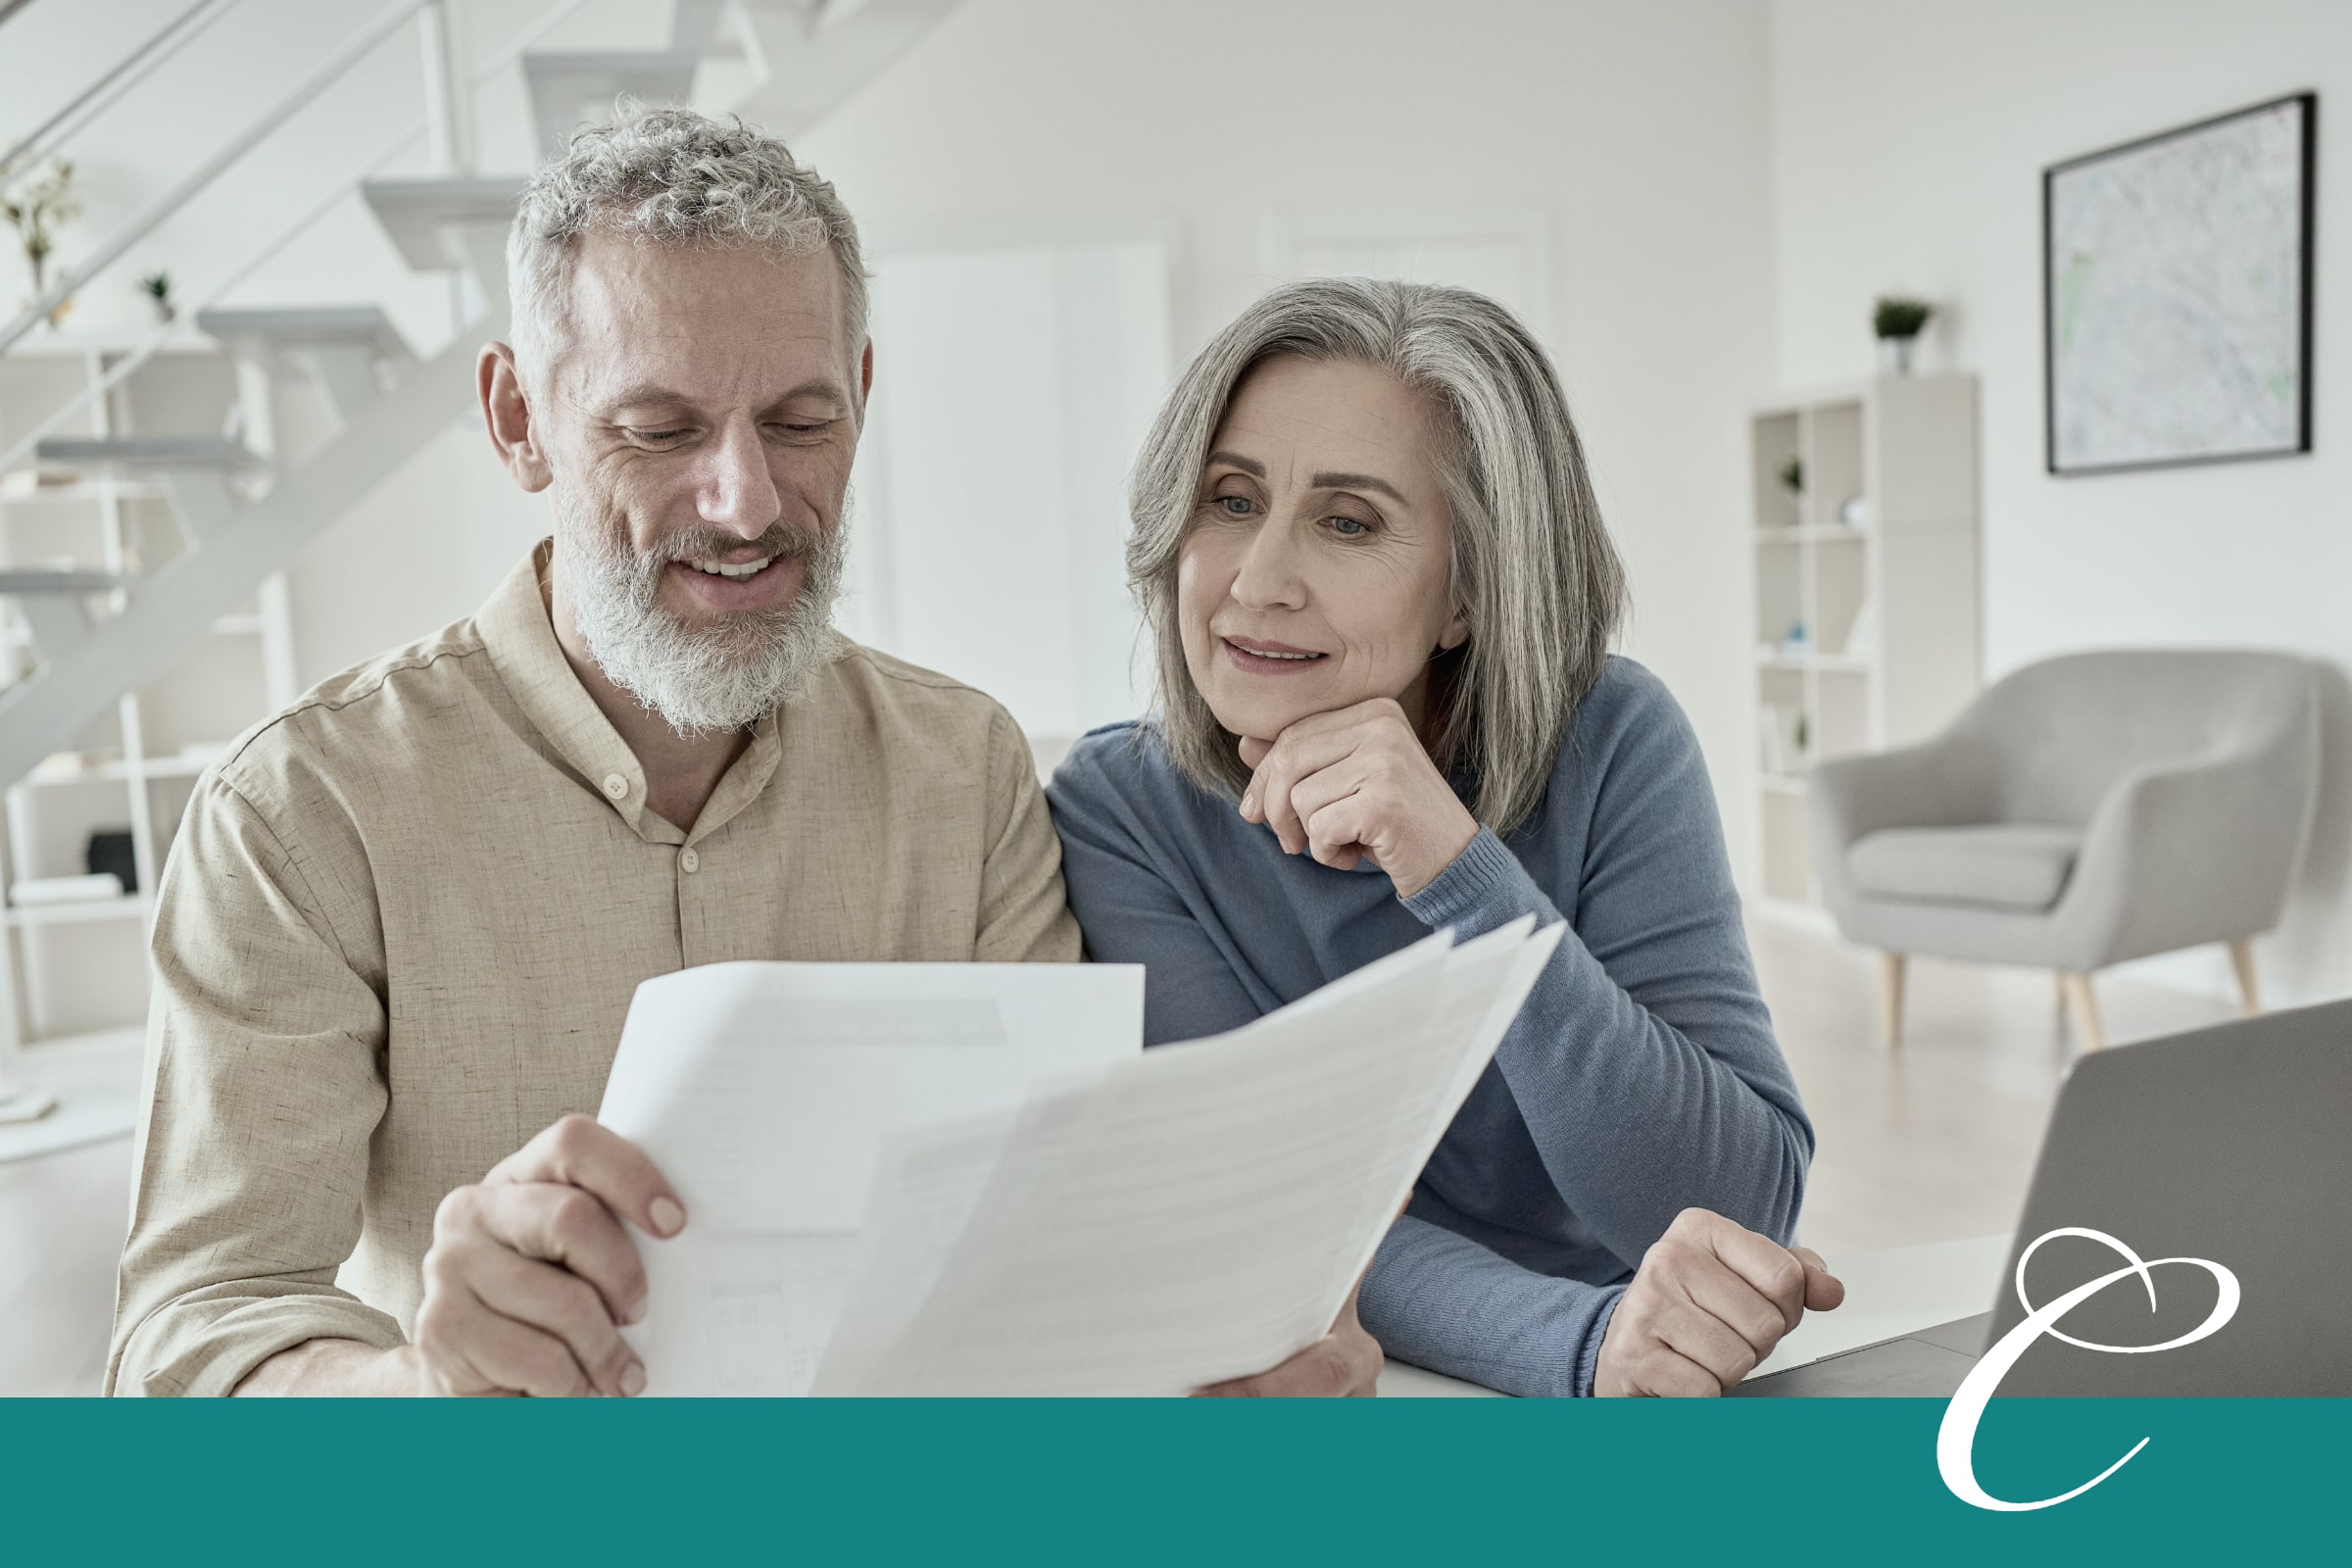 Taking advantage of retiree tax deductions is a savvy way to protect your nest egg and enjoy greater retirement security.